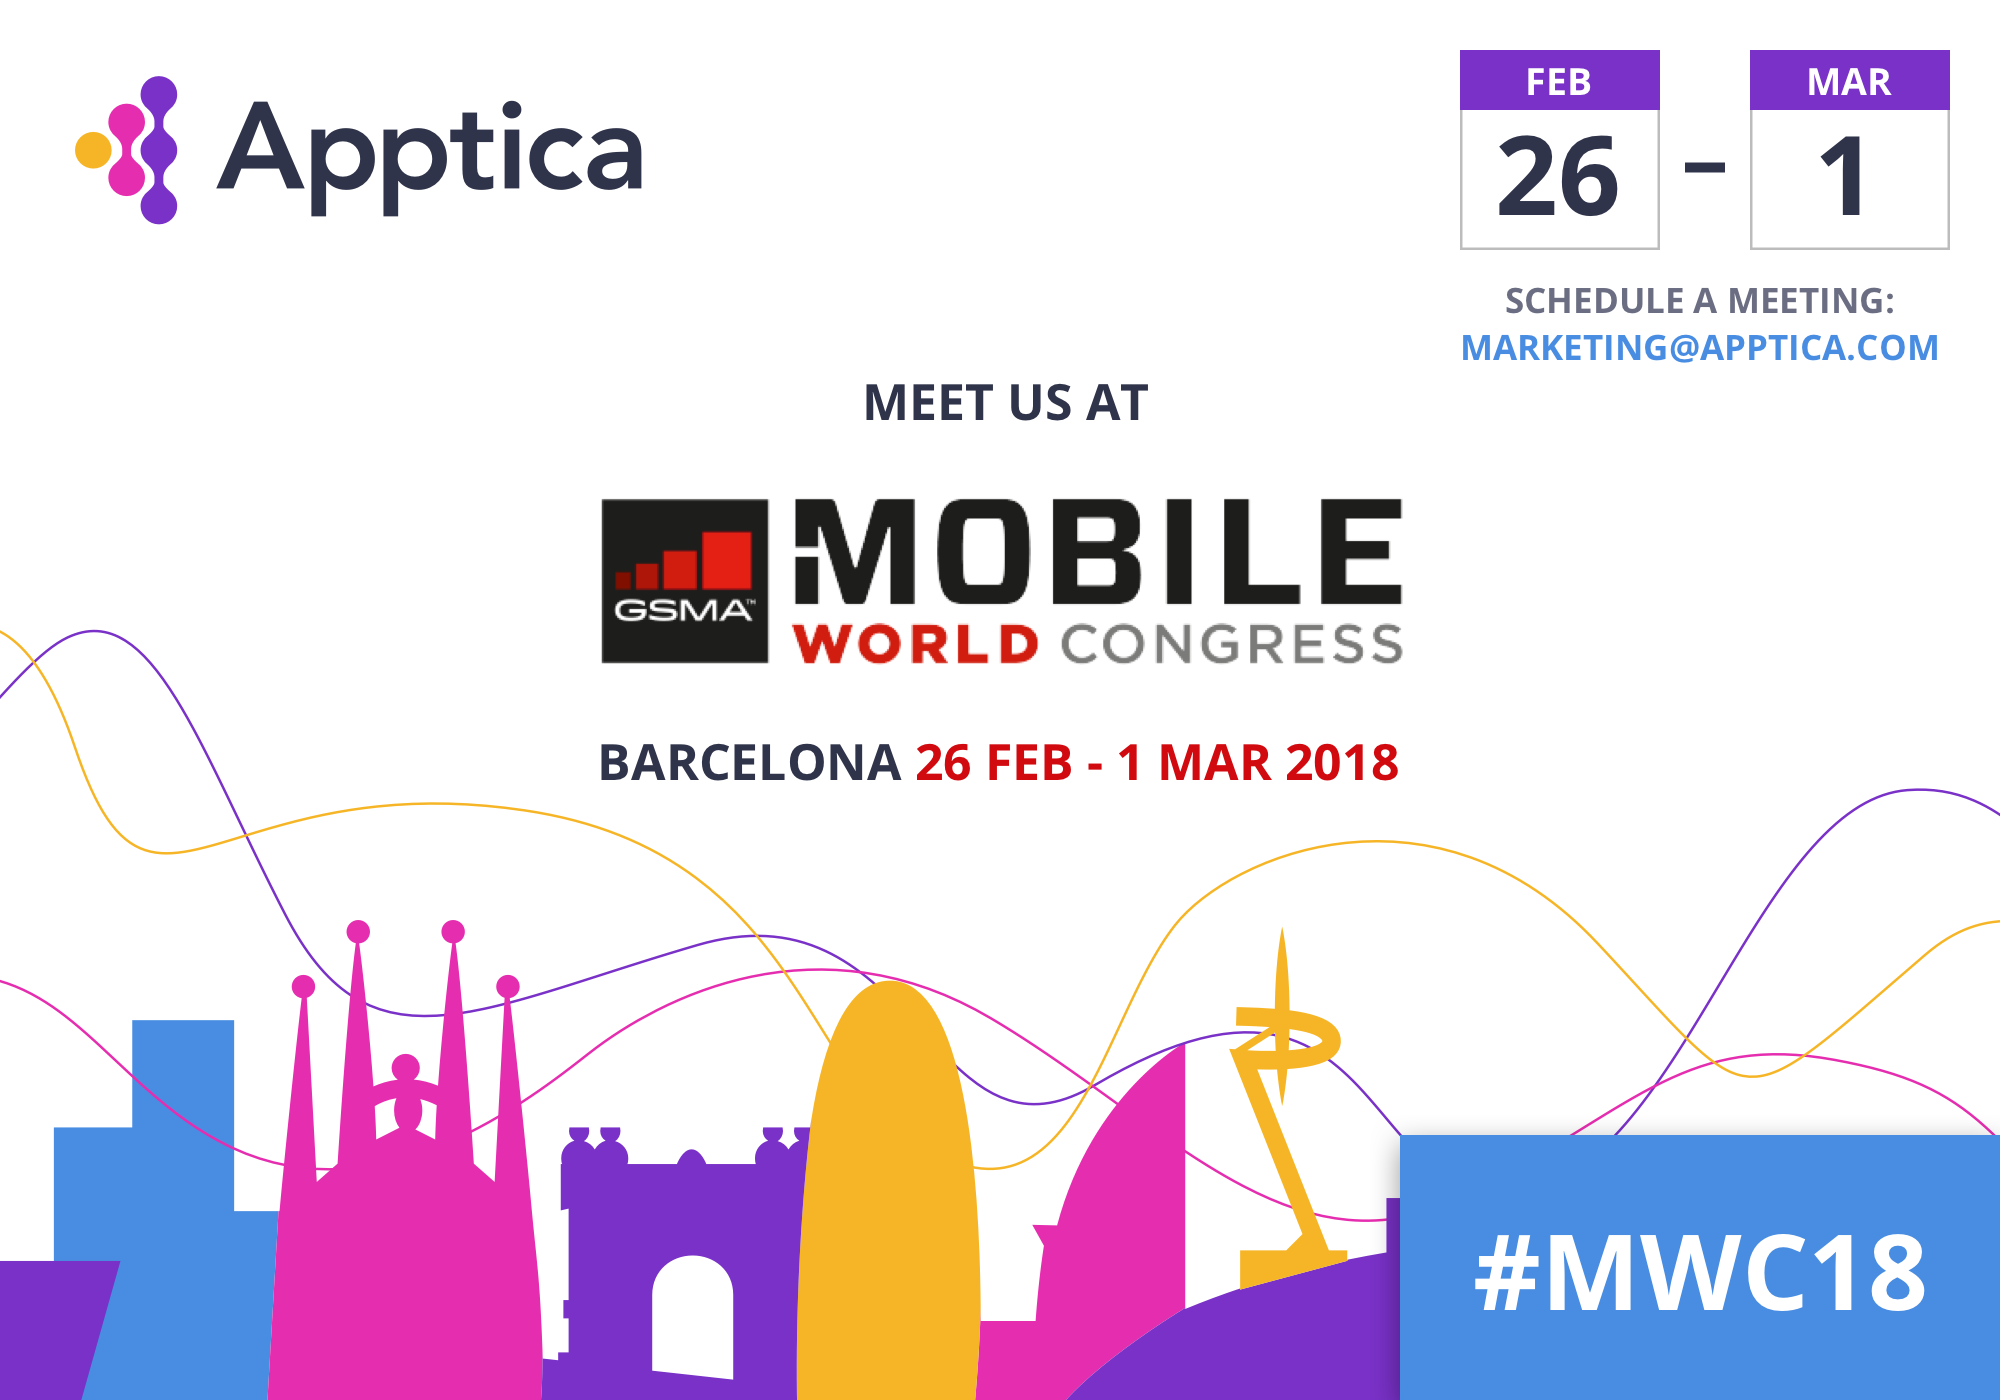 Meet with Apptica at Mobile World Congress 2018 in Barcelona, Spain